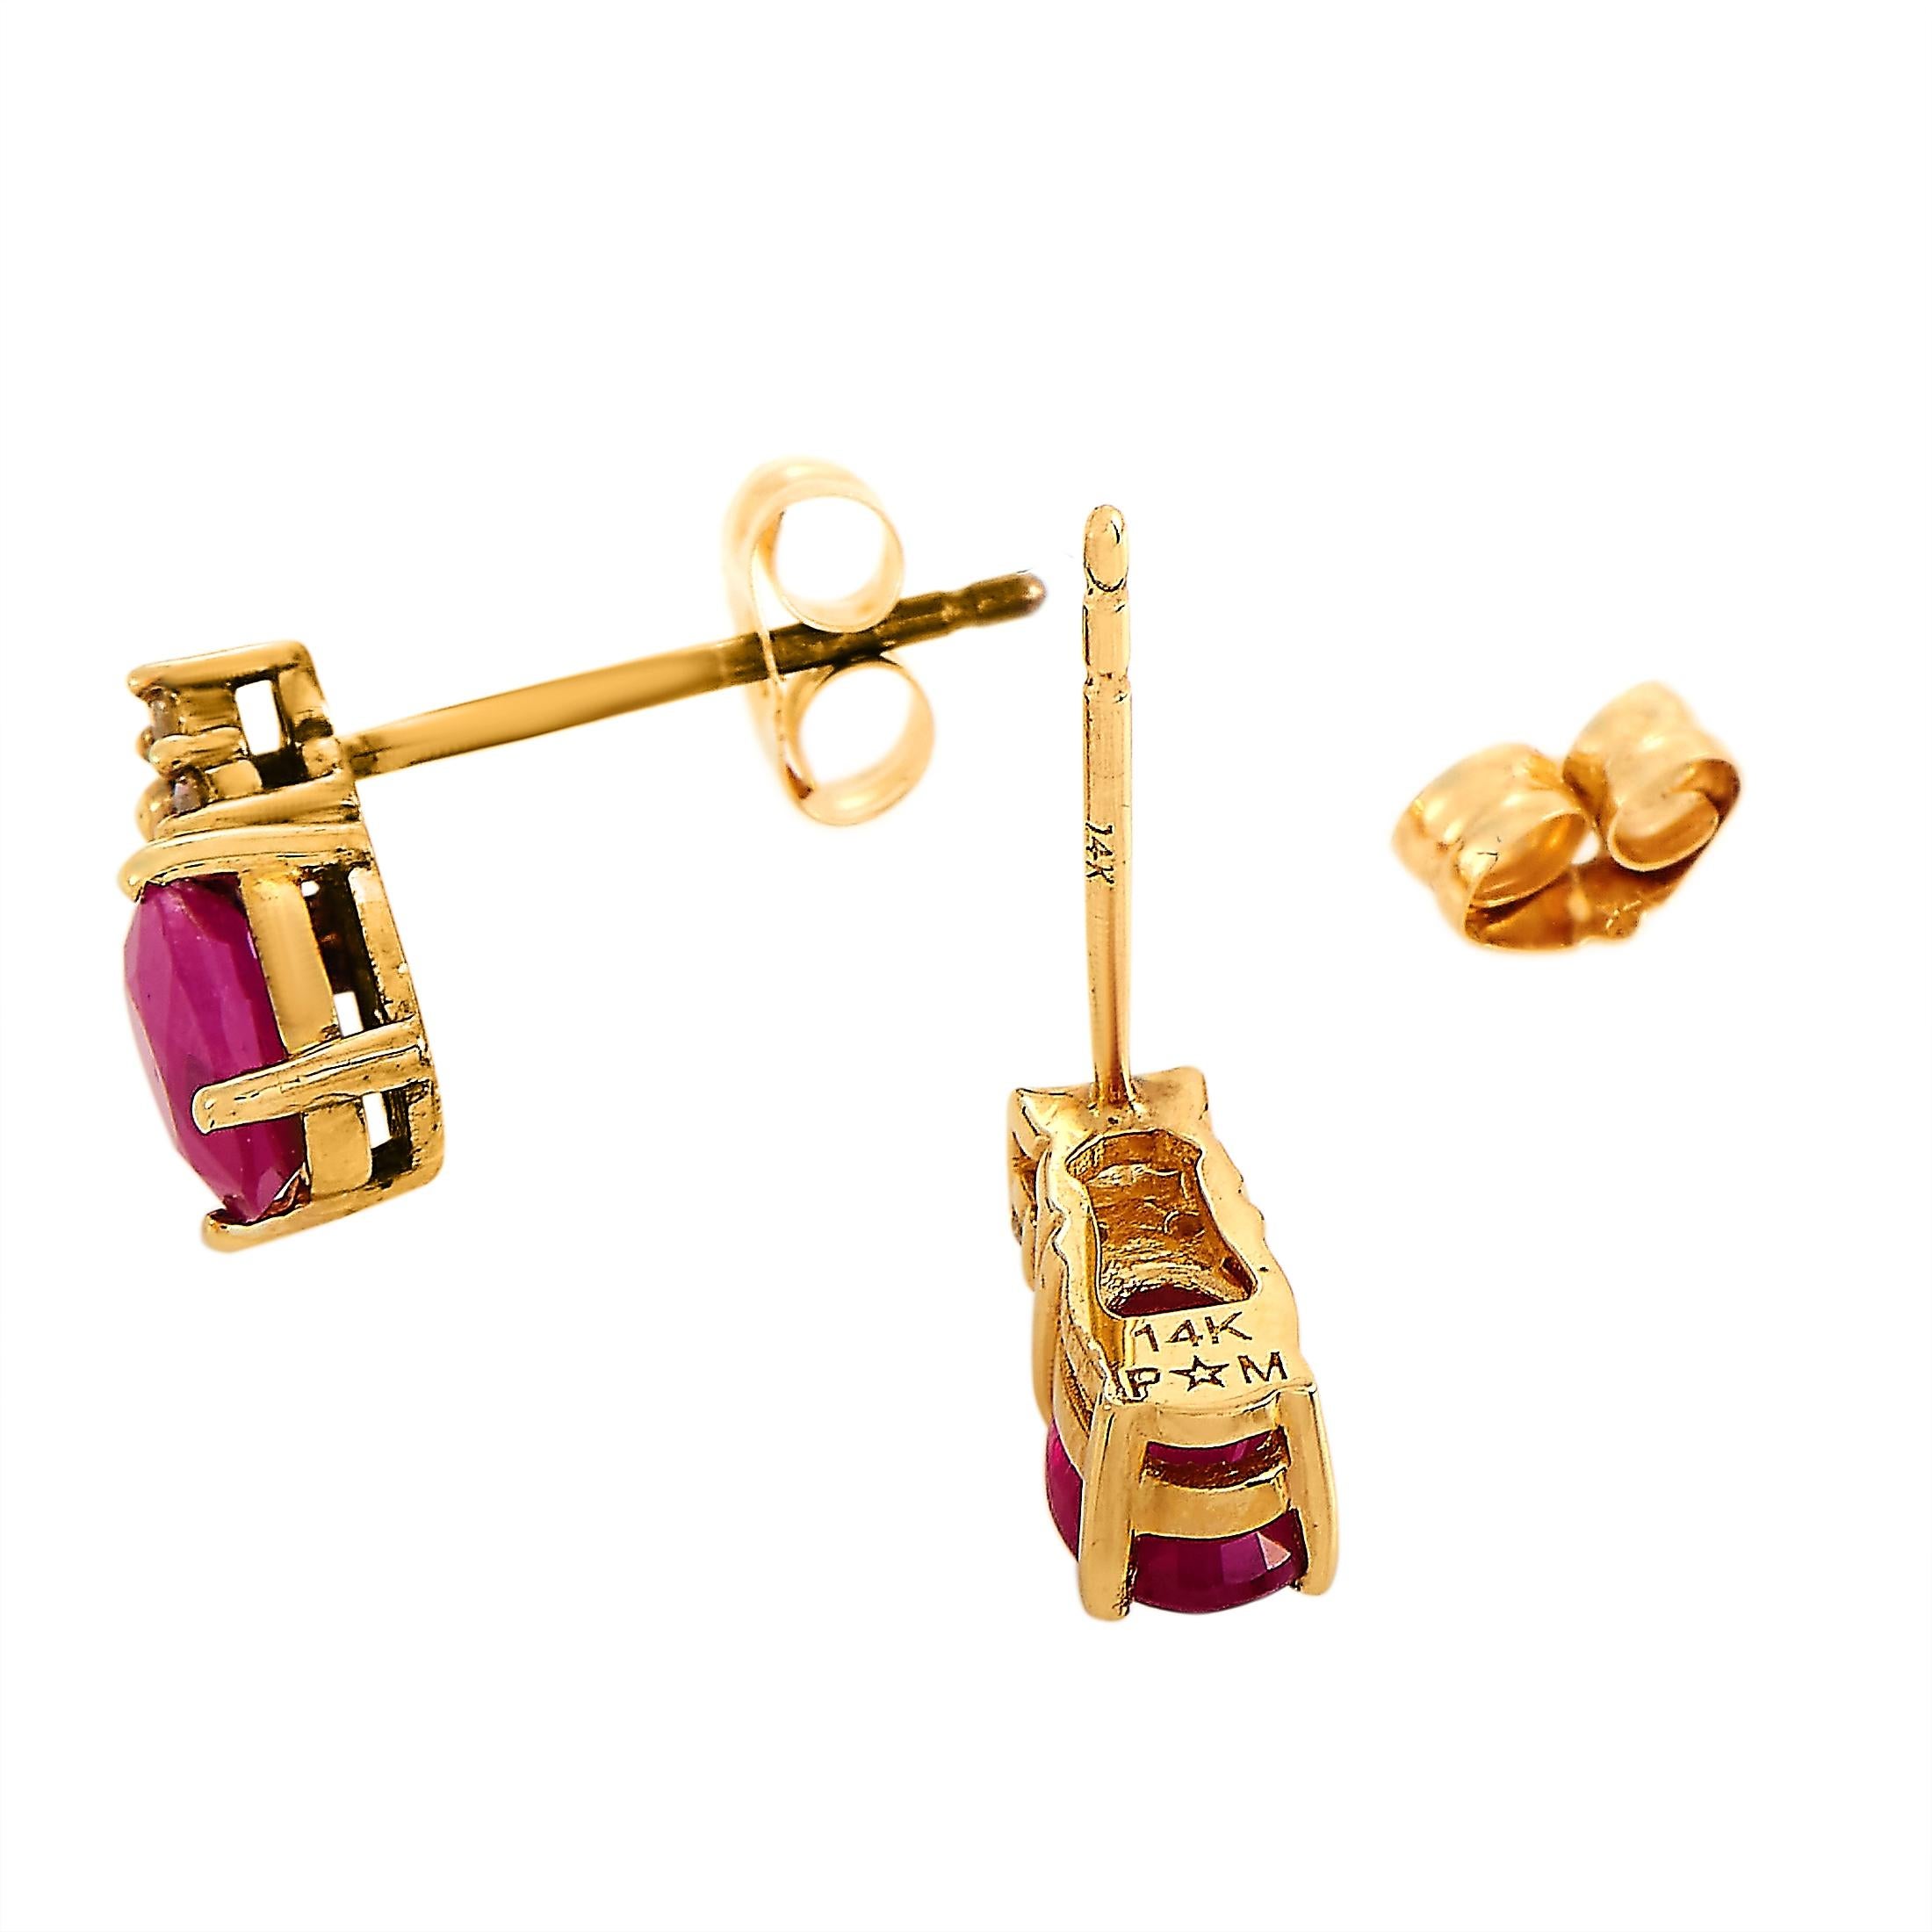 These LB Exclusive earrings are made of 14K yellow gold and embellished with rubies and a total of 0.10 carats of diamonds. The earrings measure 0.37” in length and 0.21” in width, and each of the two weighs 0.7 grams.
 
 The pair is offered in